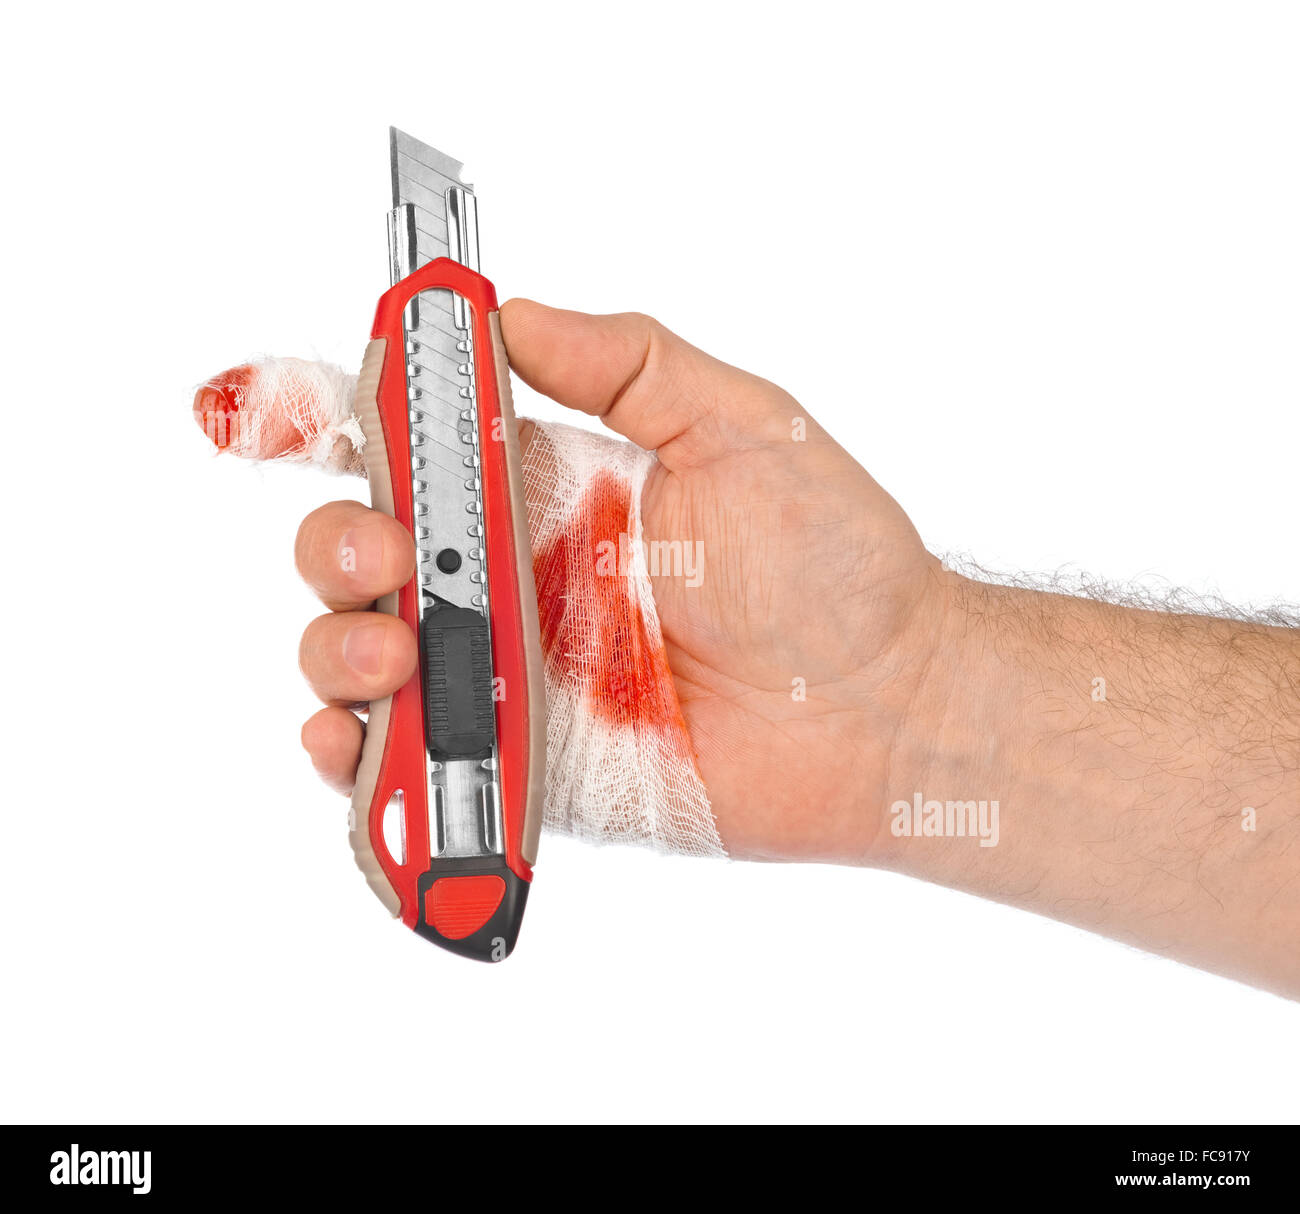 Hand with tool and bandage Stock Photo